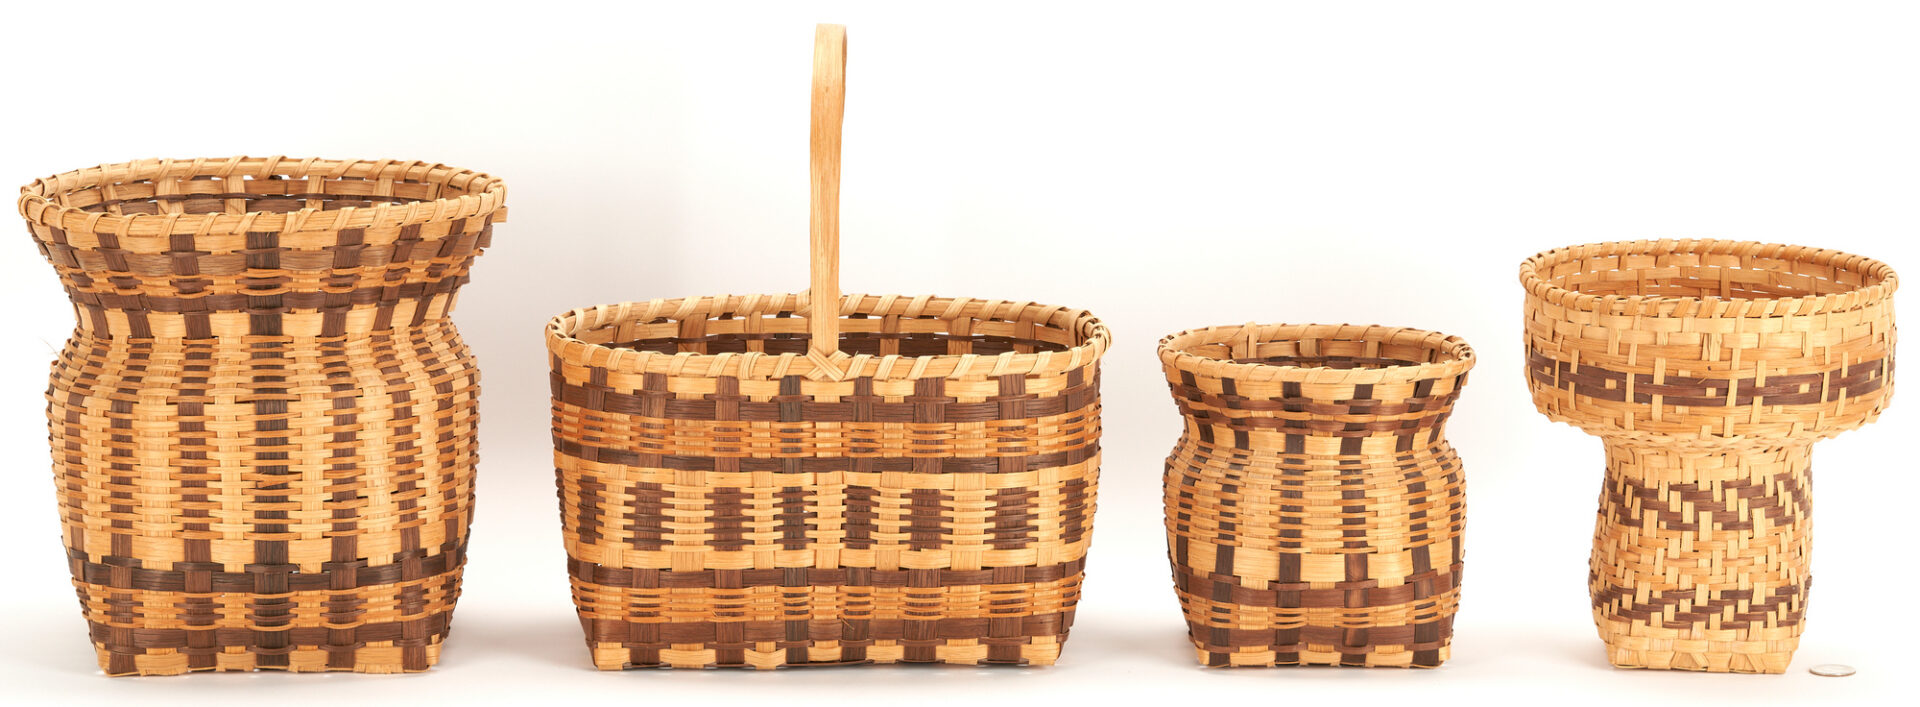 Lot 610: Four (4) Cherokee Native American Signed Baskets by Agnes Welch